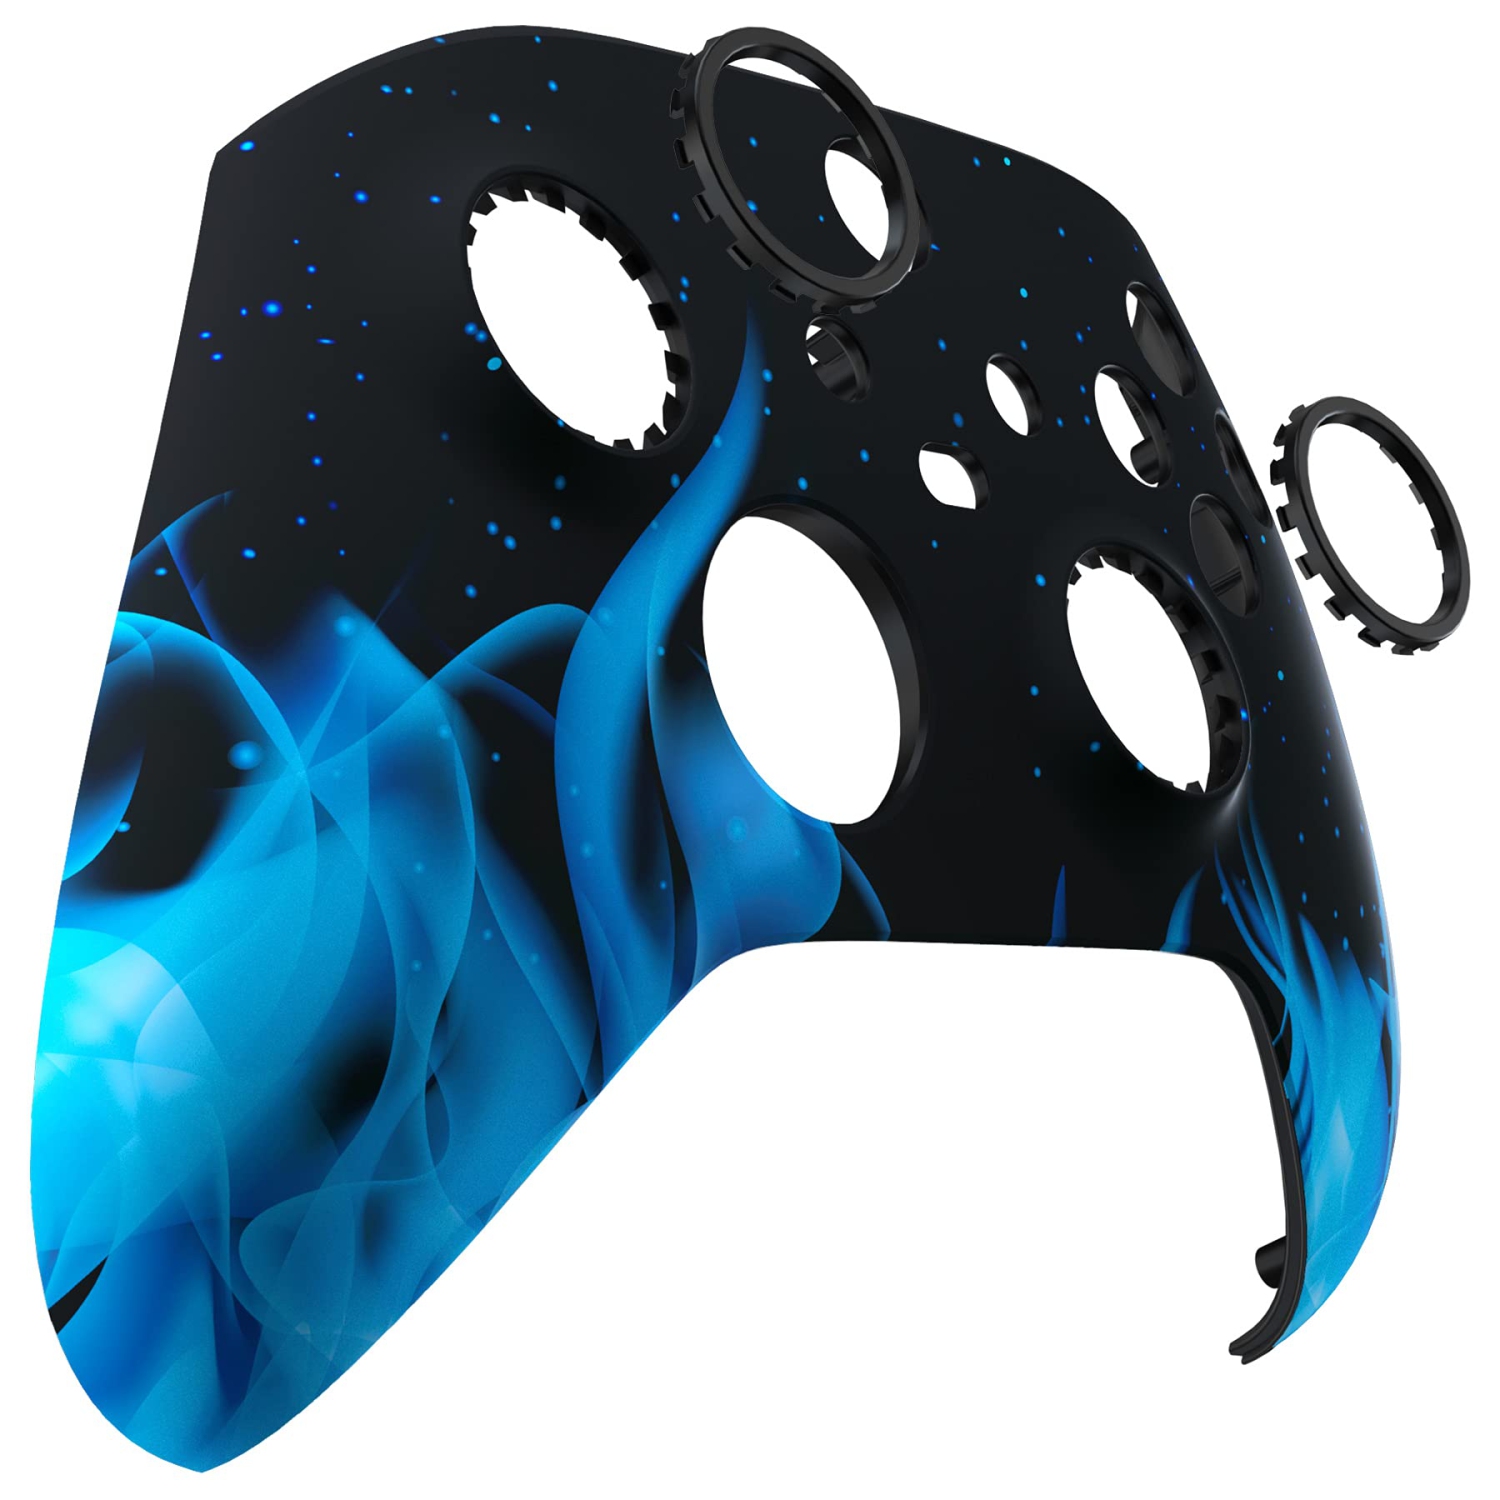 Blue Flame ASR Version Front Housing Shell w/Accent Rings for Xbox Series X/S Controller, Custom Soft Touch Cover Faceplate for Xbox Core Controller Model 1914